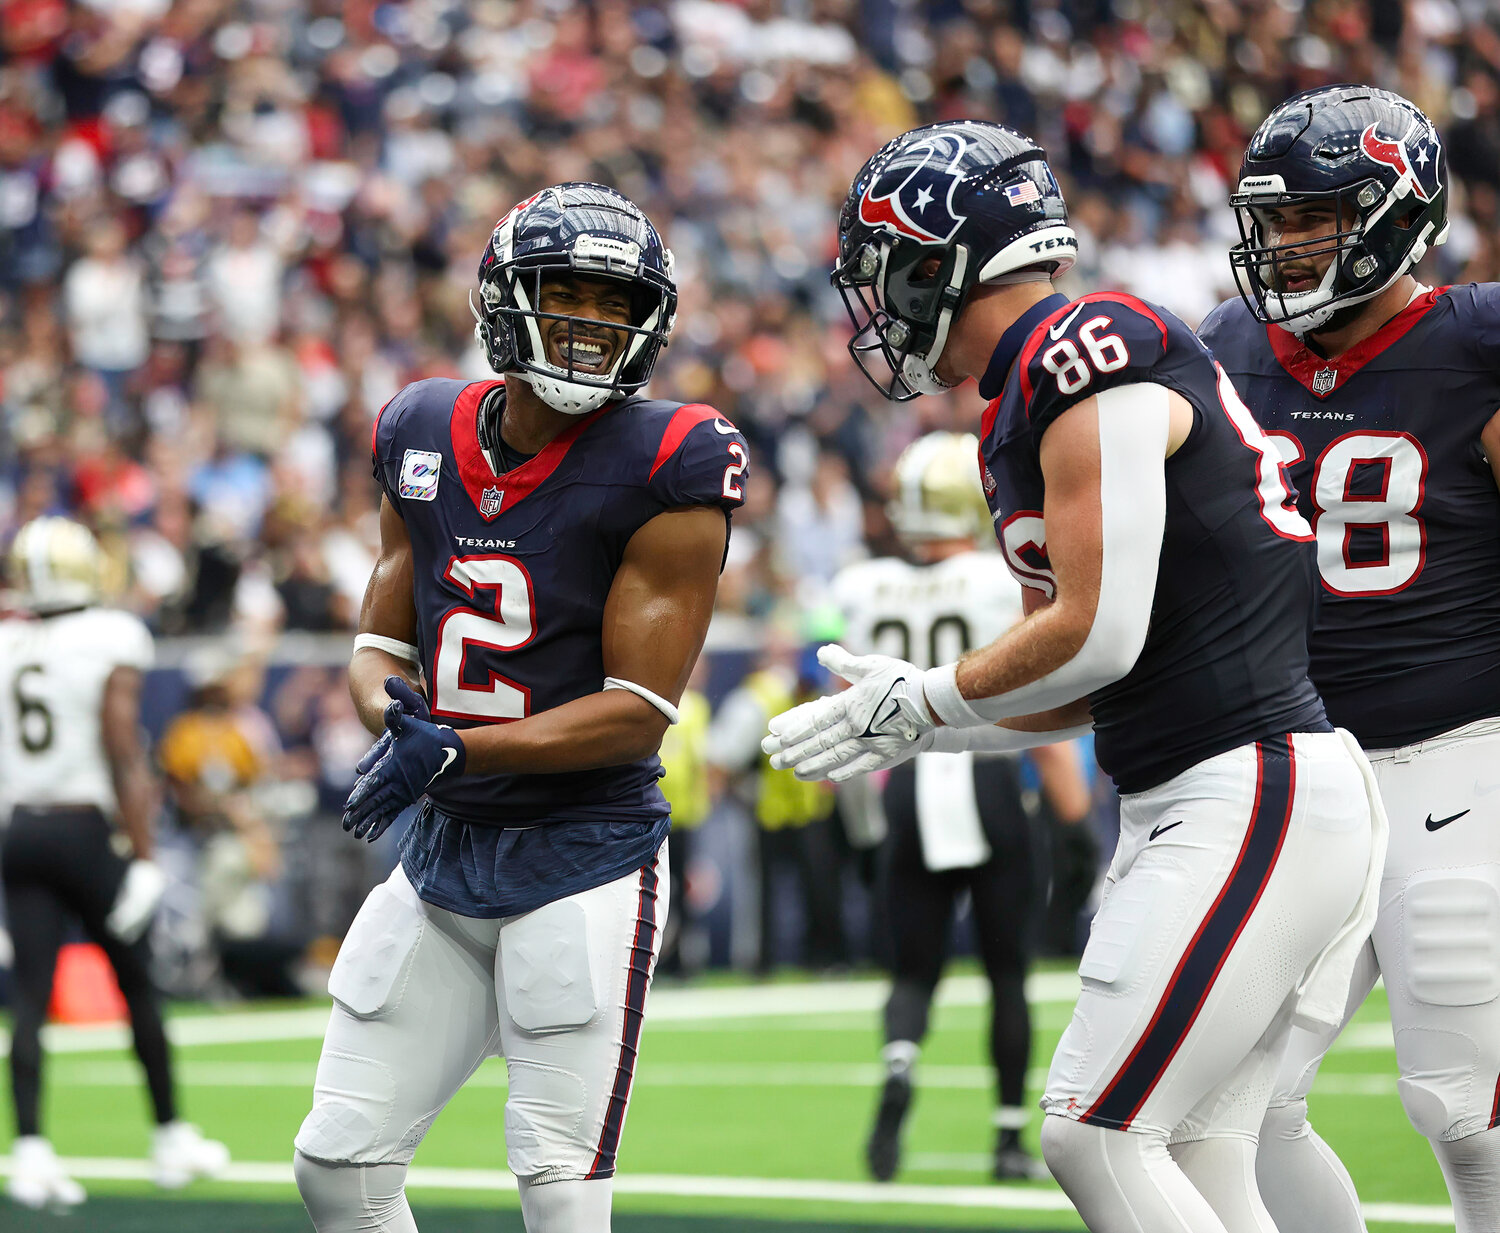 Texans wide receiver Robert Woods (2) celebrates after making a touchdown catch during an NFL game between the Texans and the Saints on October 15, 2023 in Houston. The Texans won, 20-13.